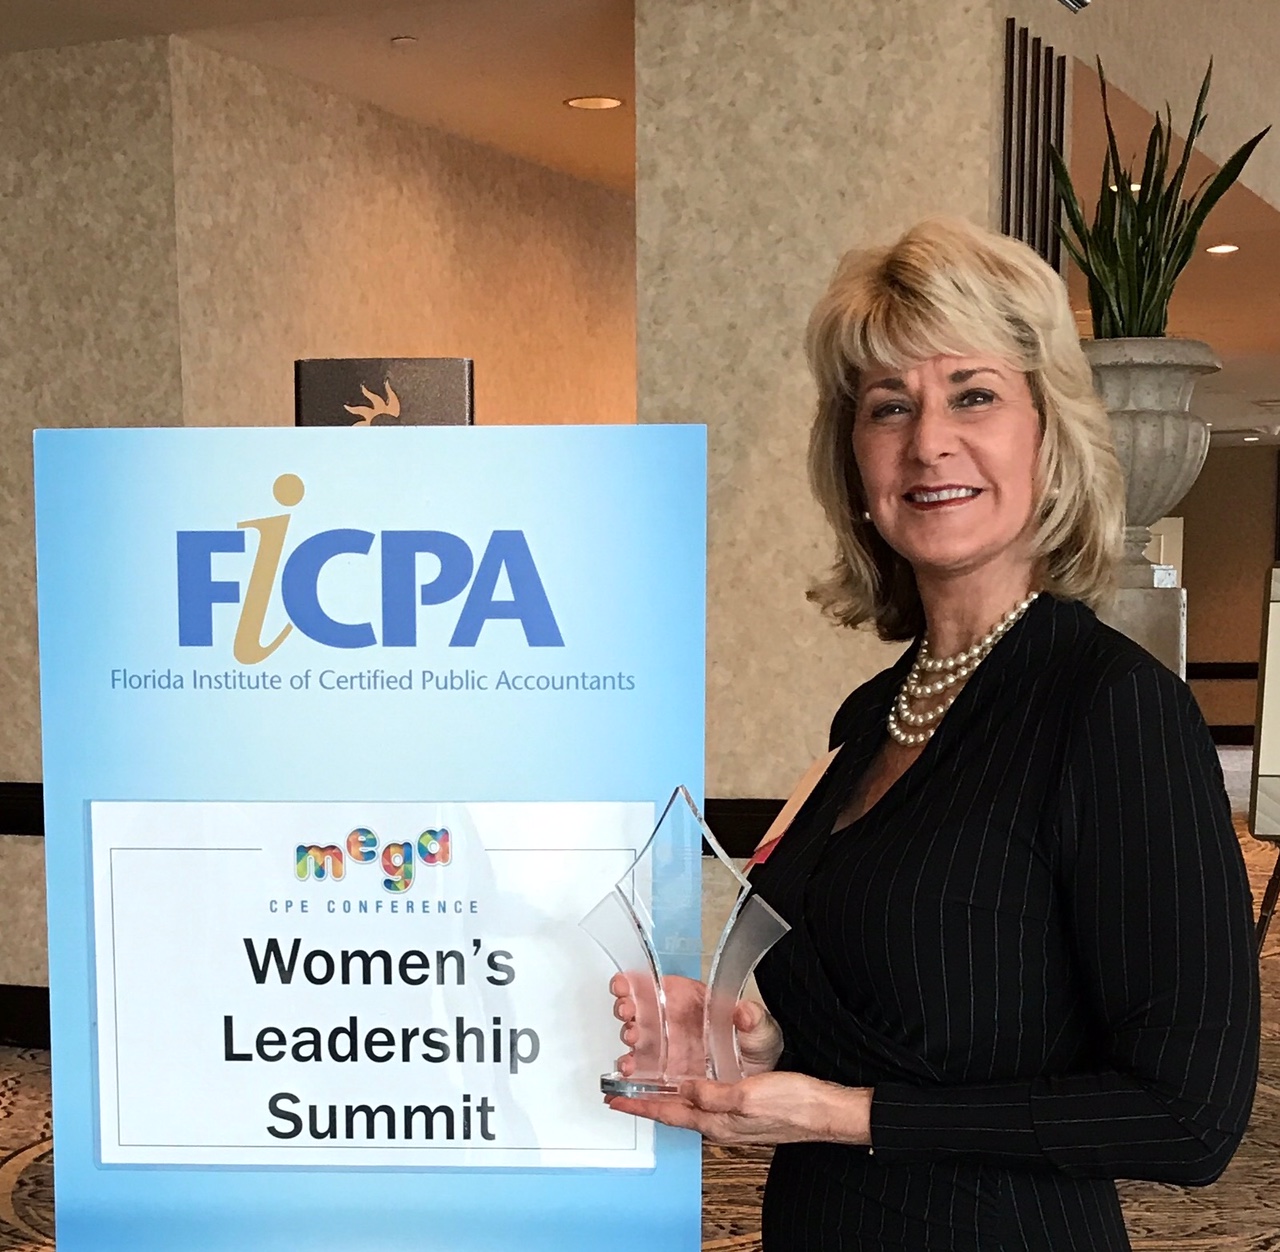 Gail with Award for FICPA